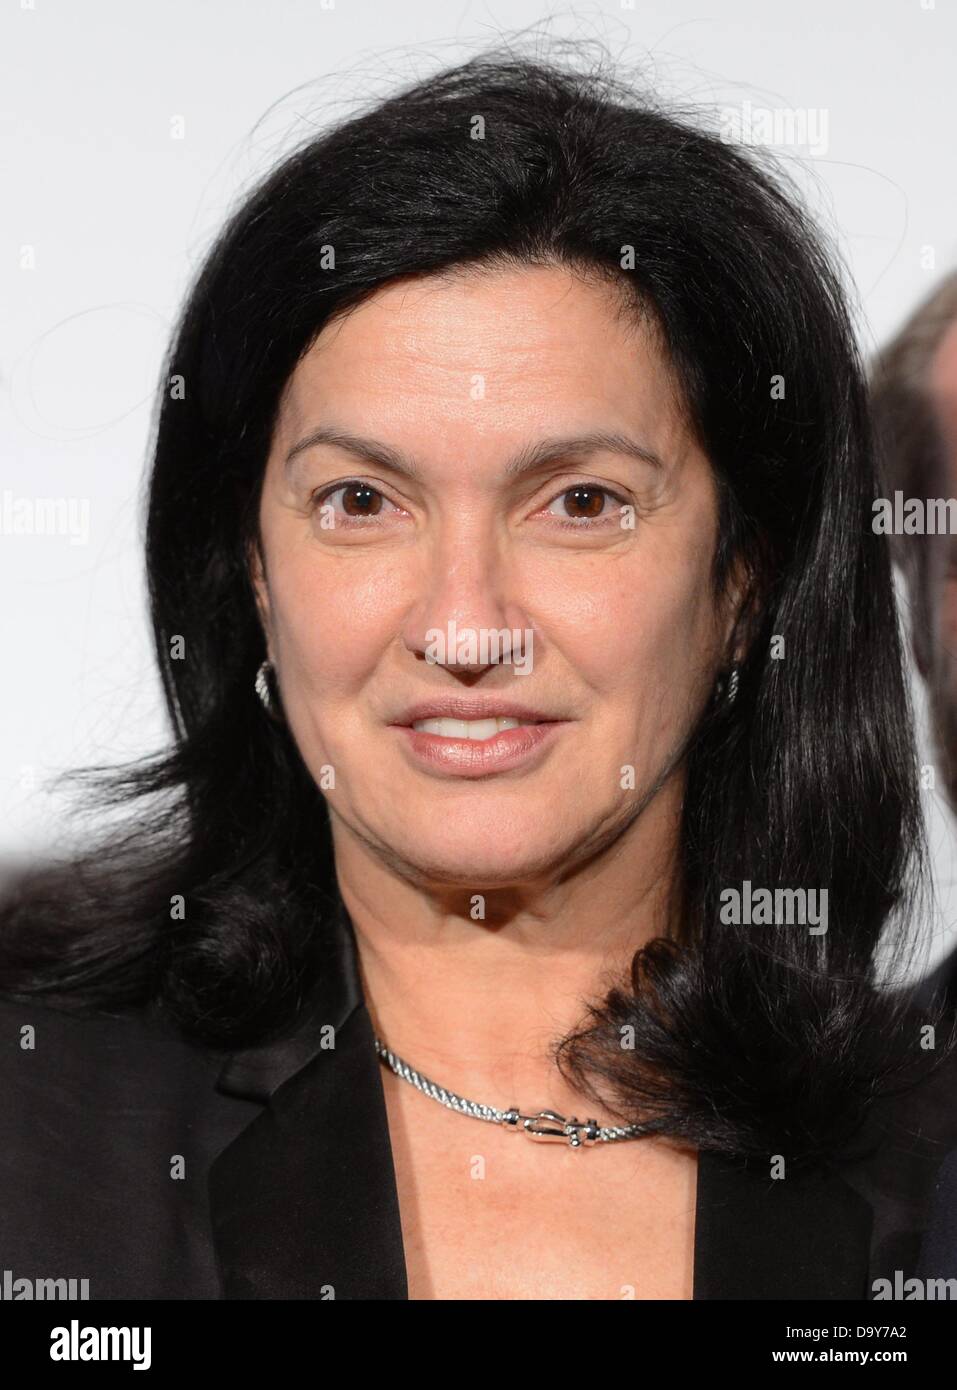 Margareth Henriquez, President and CEO of Krug Champagner, is pictured during a statement round of the German association of luxury manufacturer 'Meisterkreis' at the Hotel Adlon in Berlin, Germany, 27 June 2013. The French association of 'Comite Colbert' and their members were invited to Berlin by 'Meisterkreis' as part of the celebrations of the 50th anniversary of the Elysee Treaty. Photo: JENS KALAENE Stock Photo